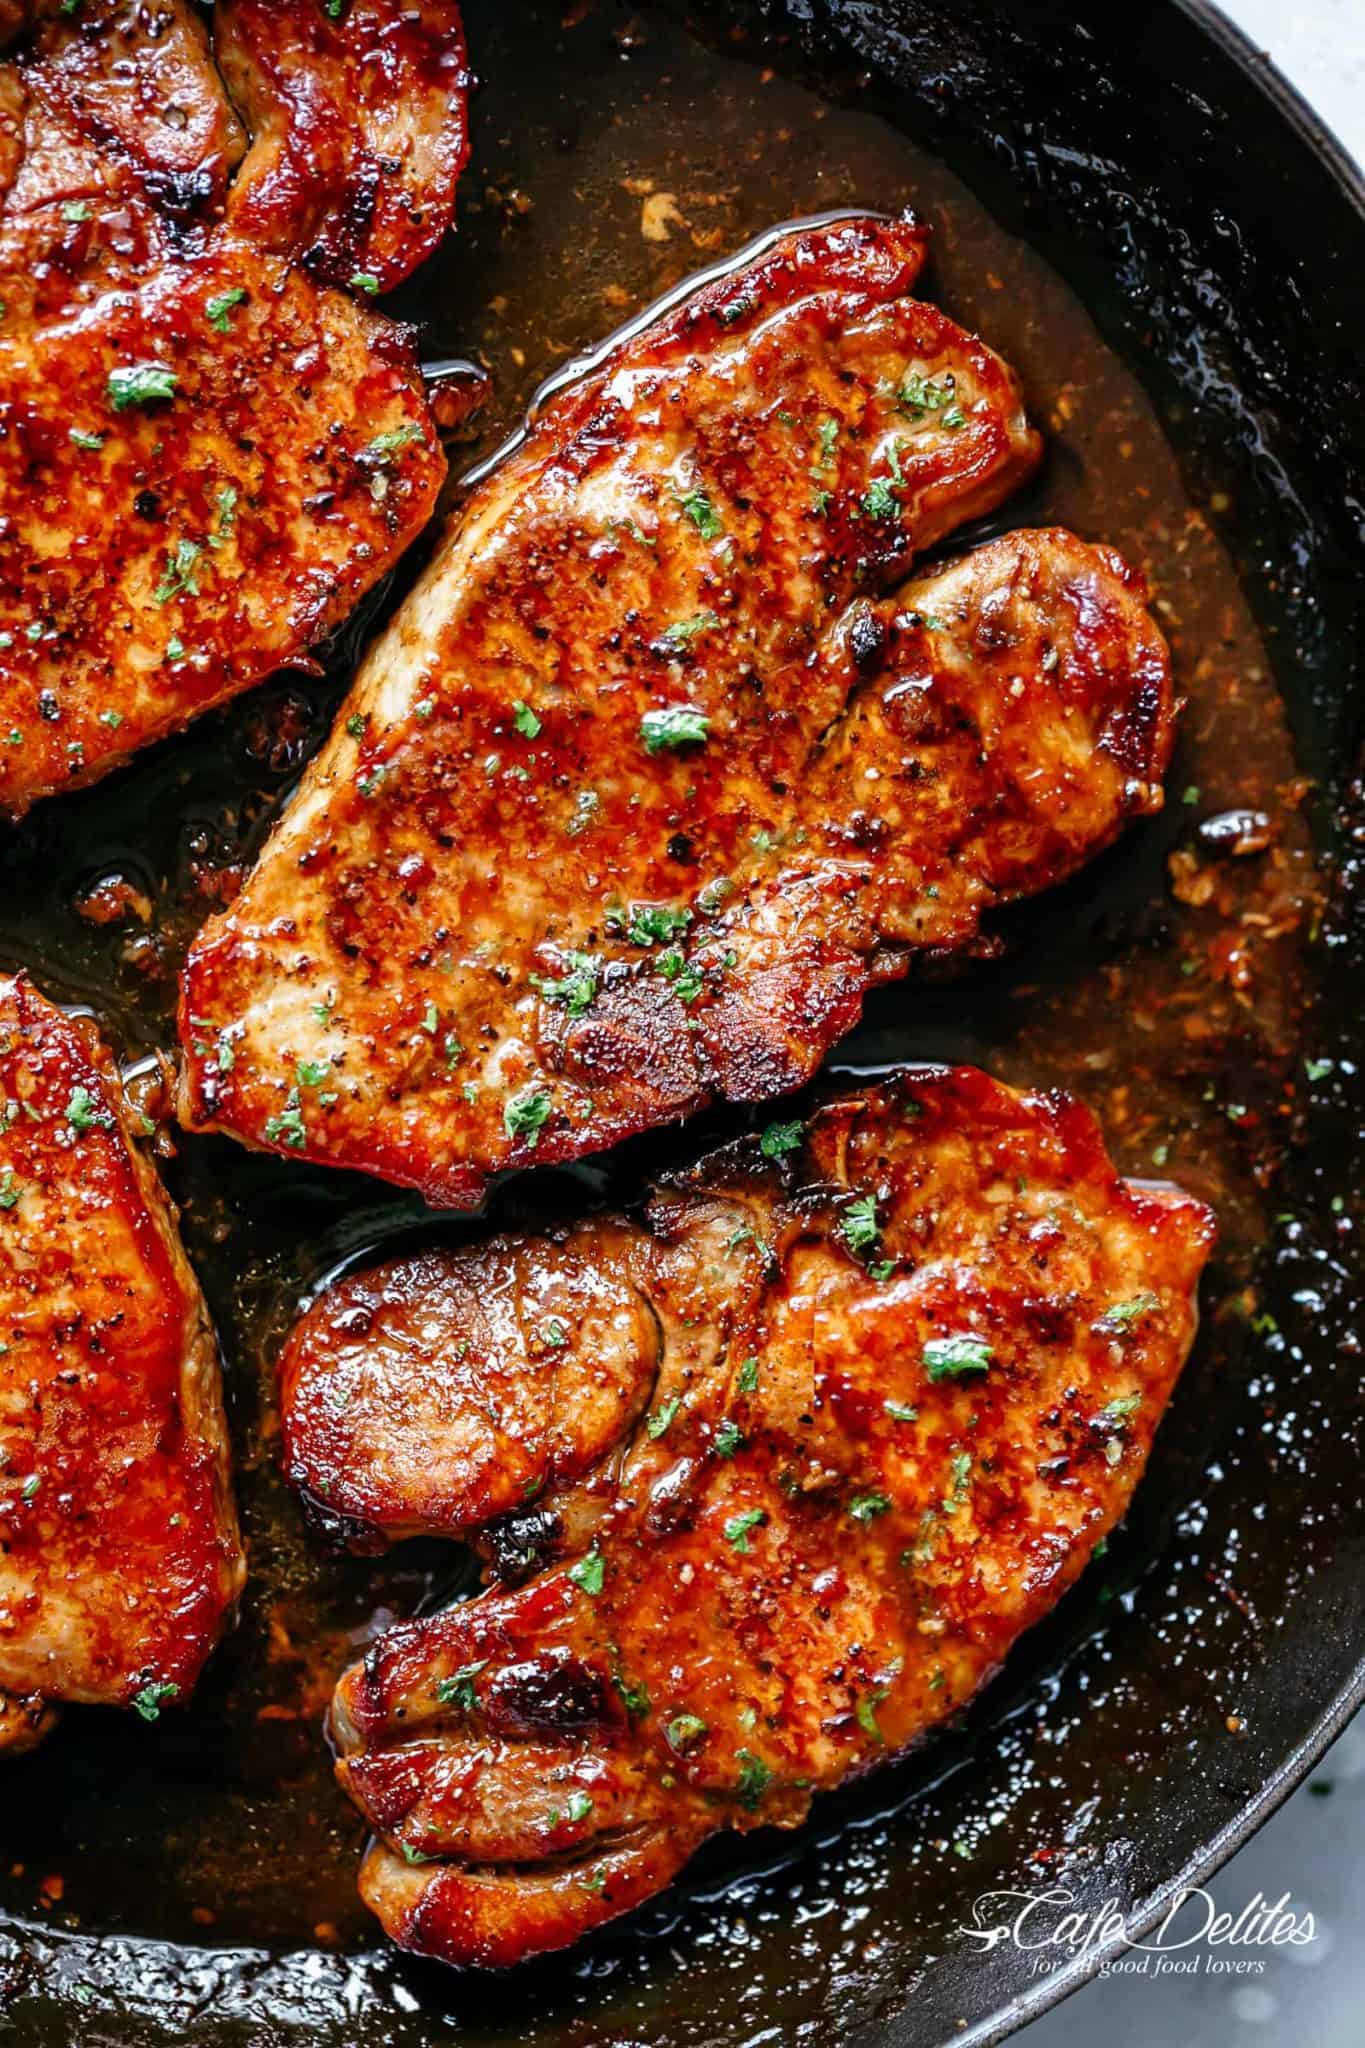 Easy Recipe for Pork Chops Woth Bone - McGhee Yountered